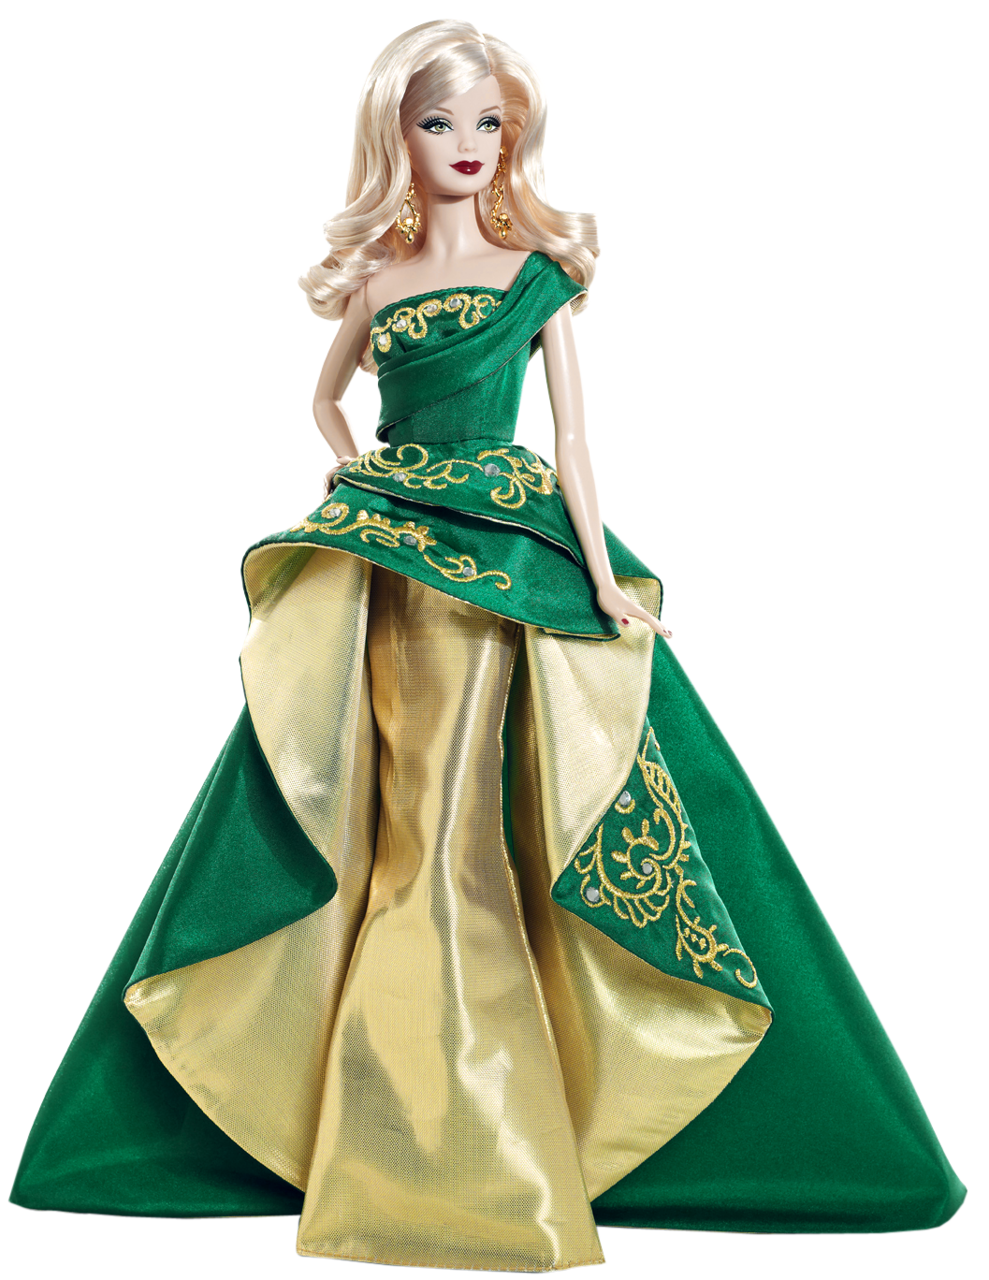 Download Gown Doll Barbie Download Free Image HQ PNG Image ...